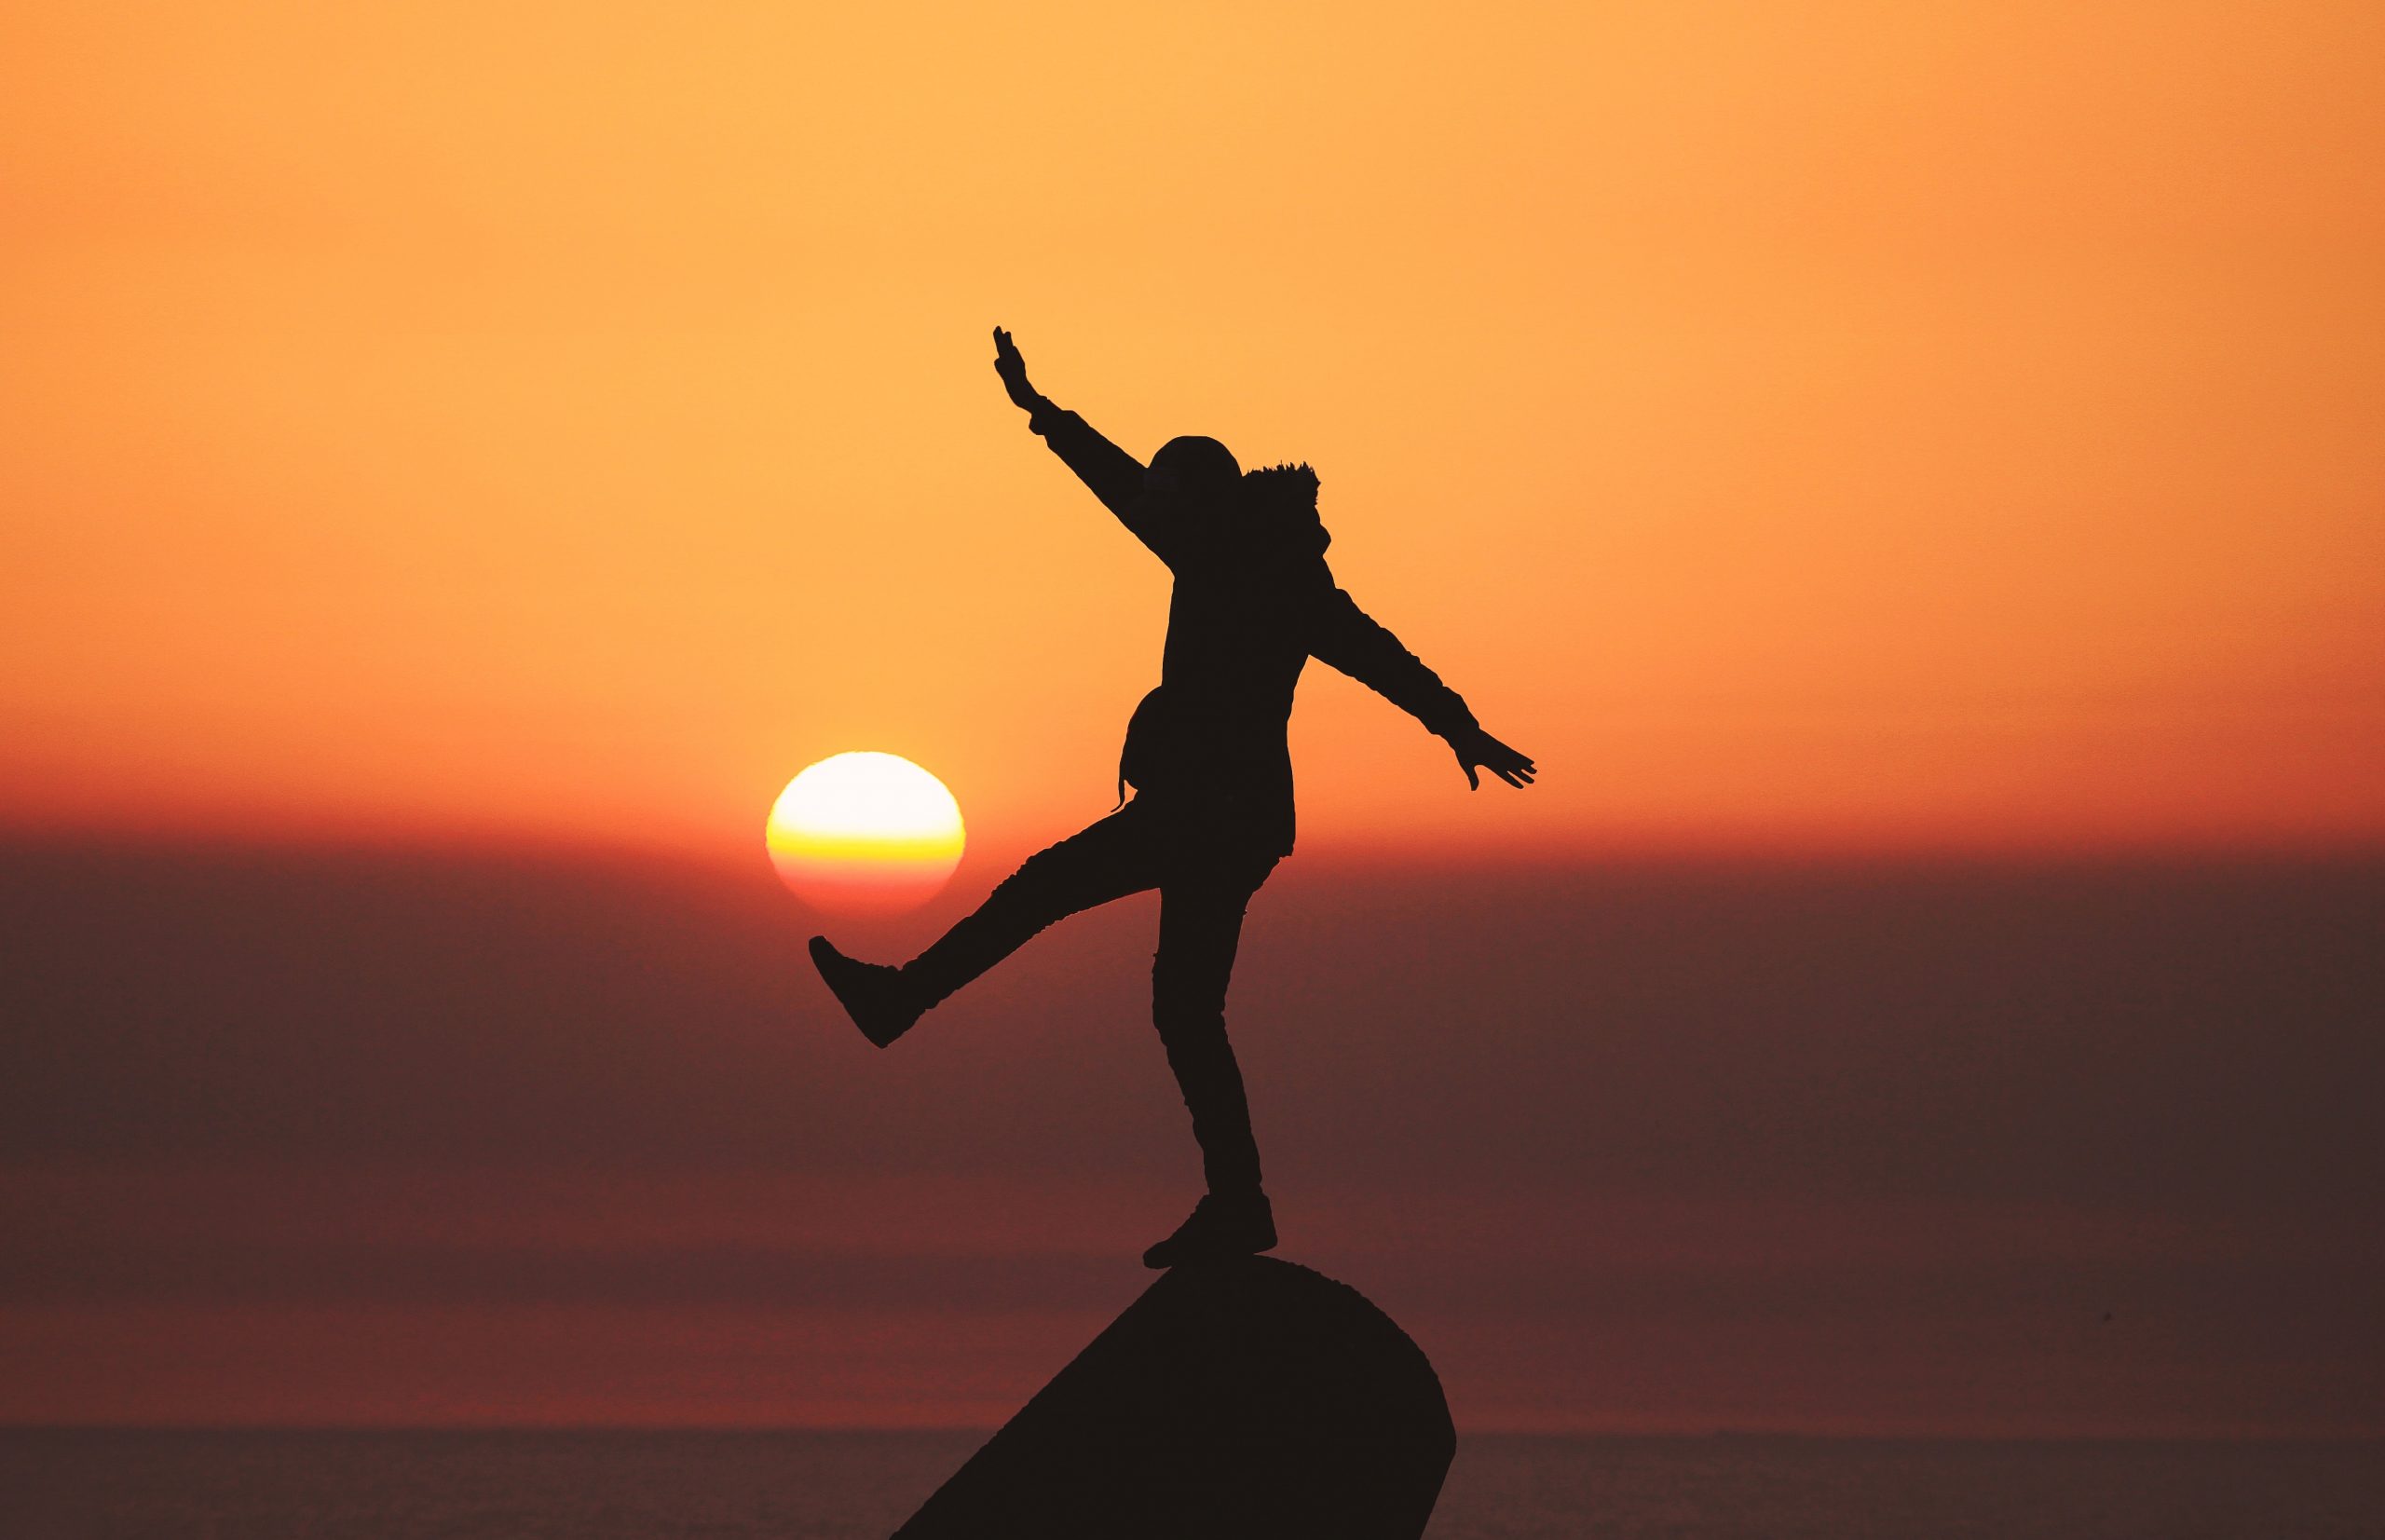 A person balances atop a rock on one foot as the sun sets on the horizon. Staying energized and inspired to achieve your goals is easier when you live your life in balance.